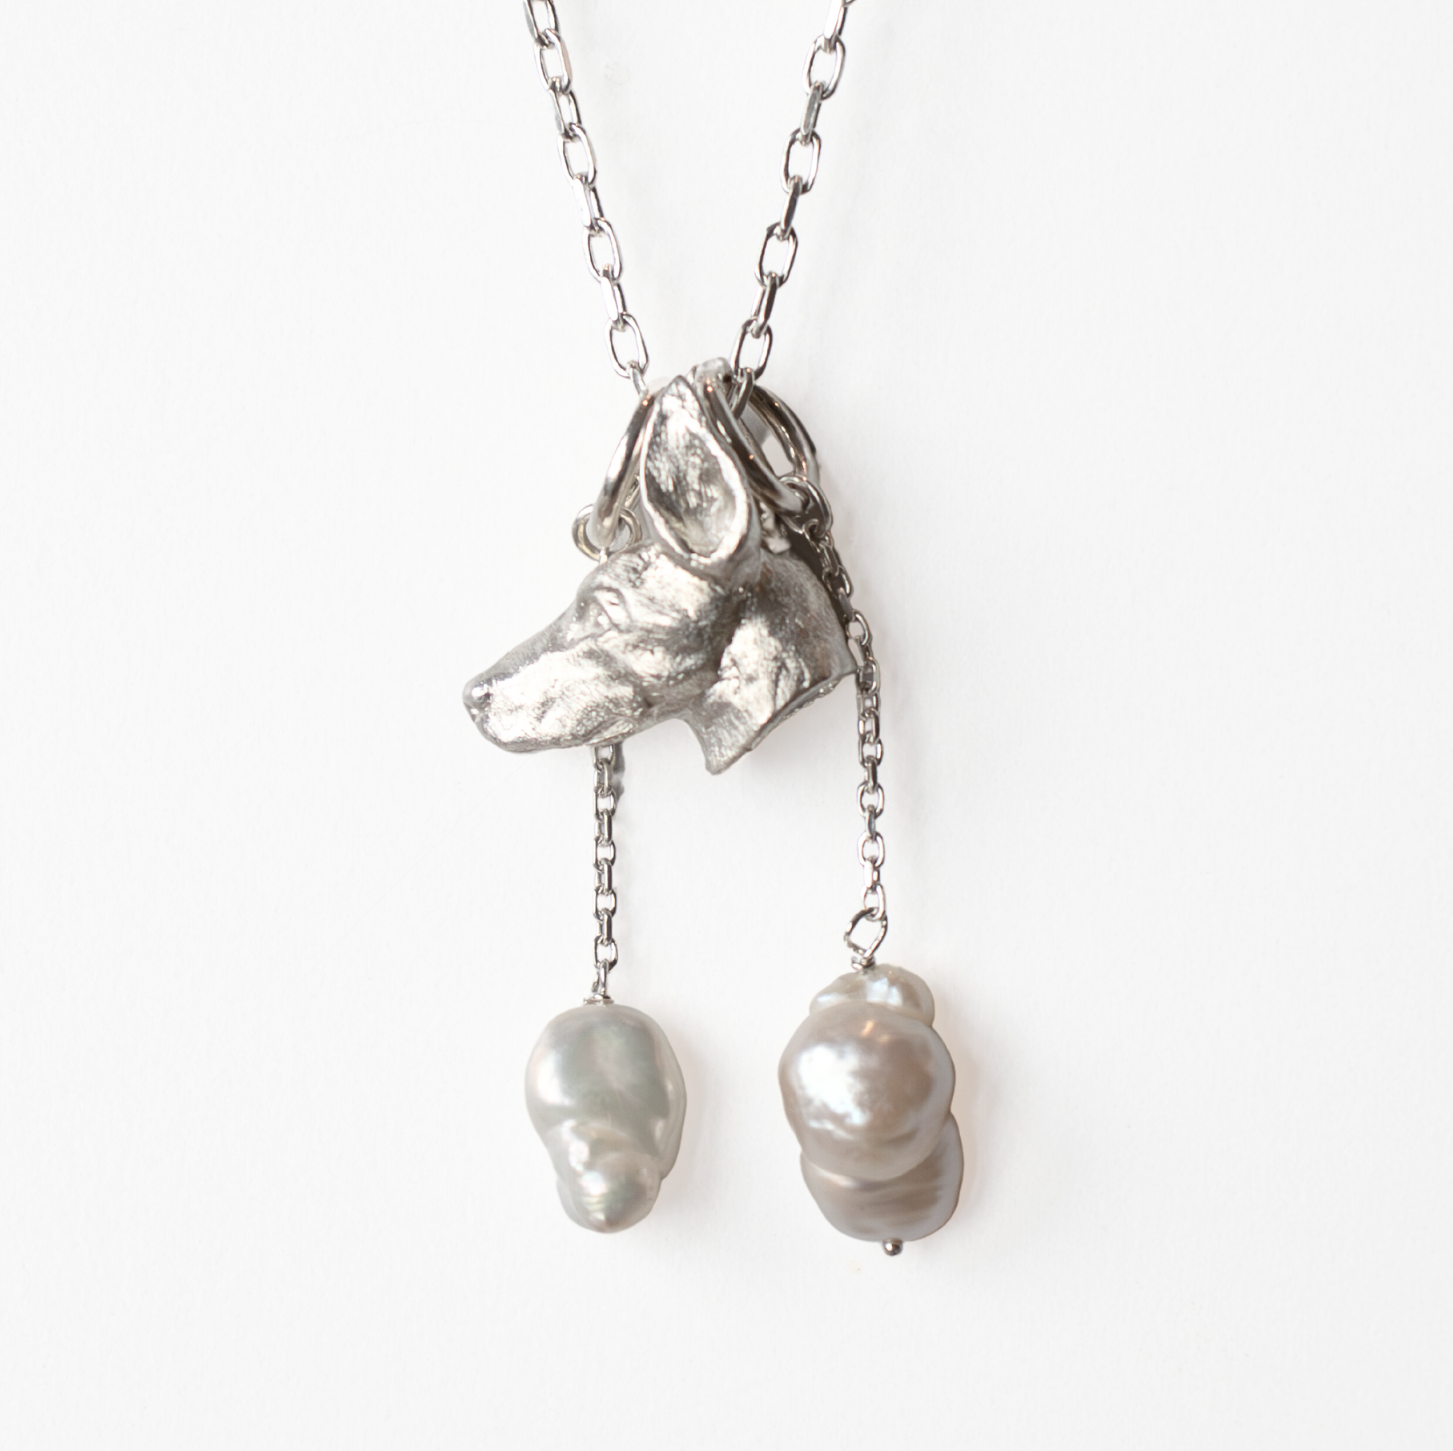 Doberman Pendant with Drop Freshwater Pearls by Paul Eaton Sculptor